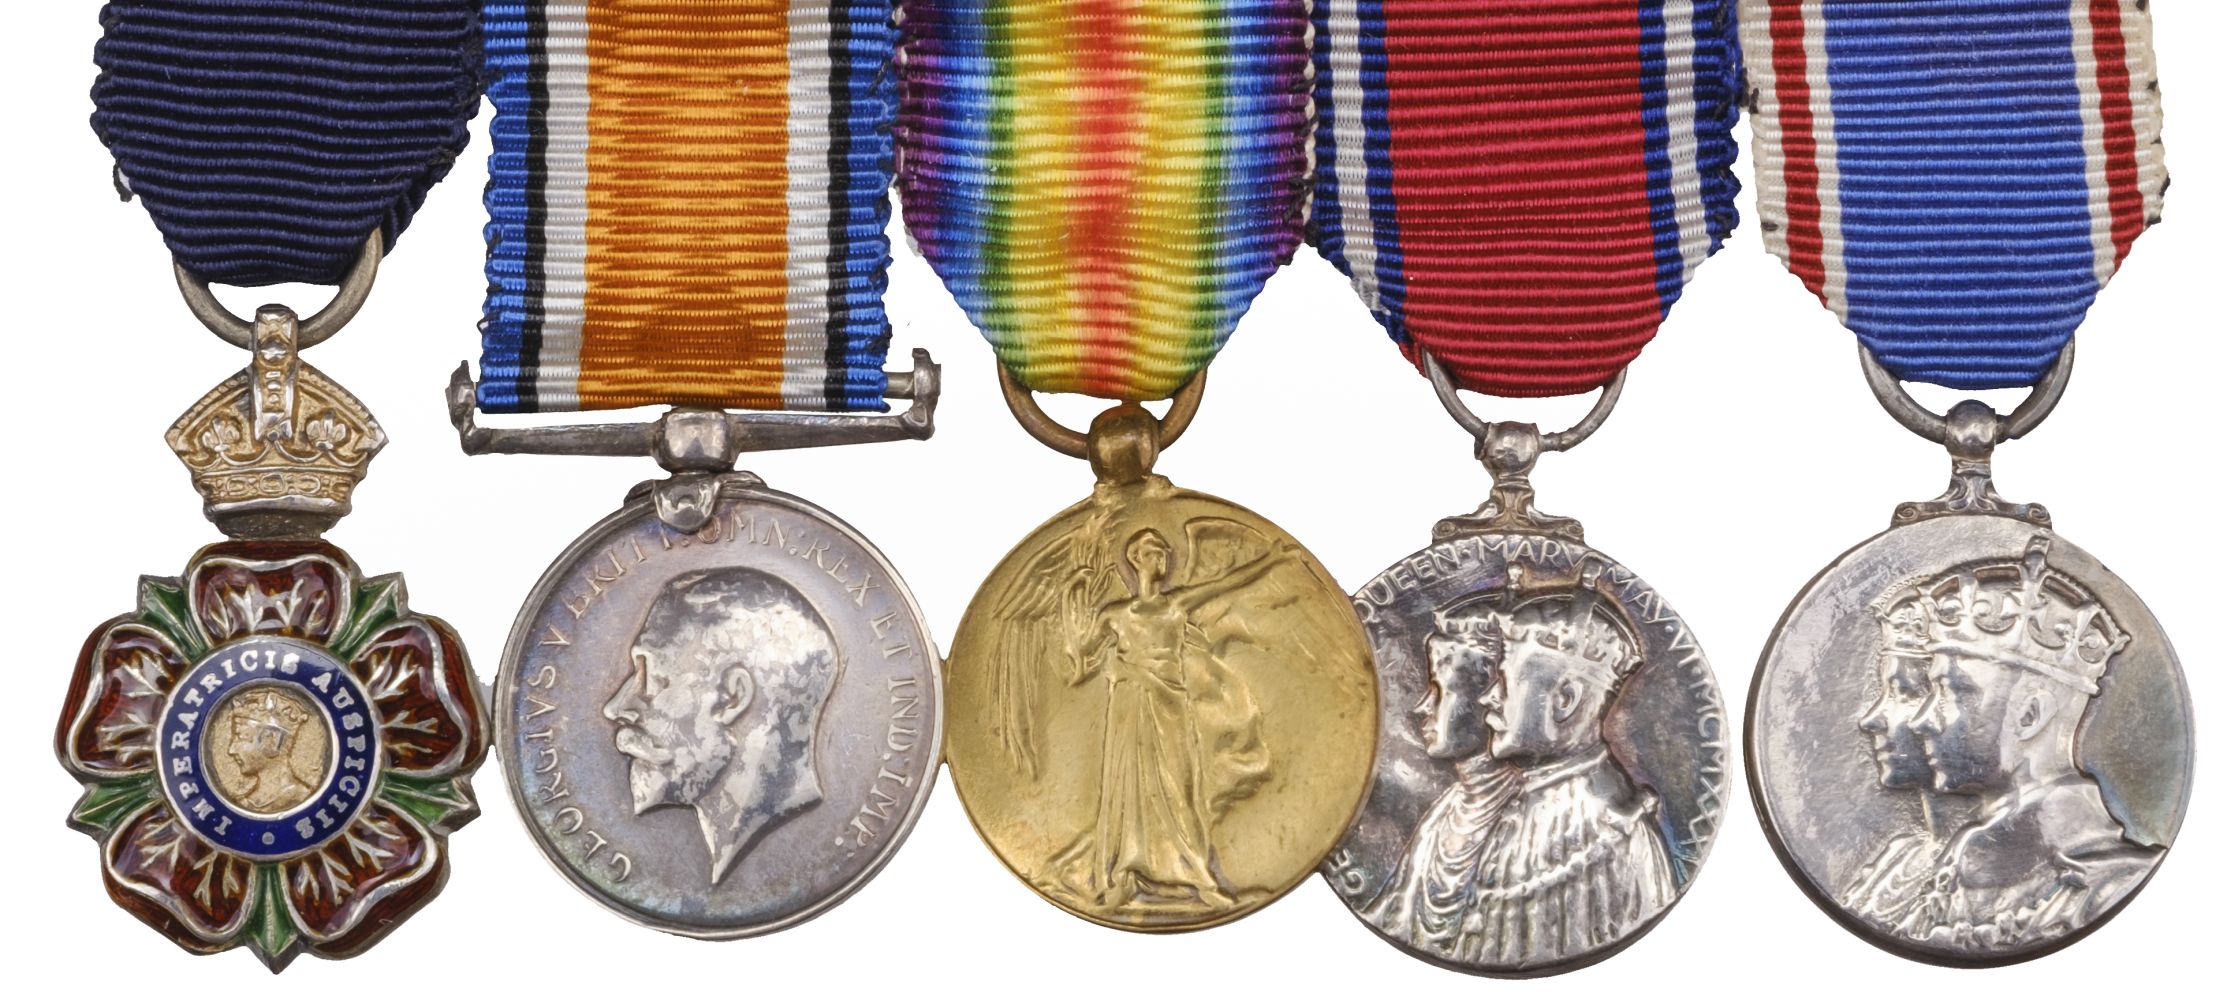 Miniature dress medals attributed to A.V. Askwith, C.S.I., C.I.E., Indian Civil Service